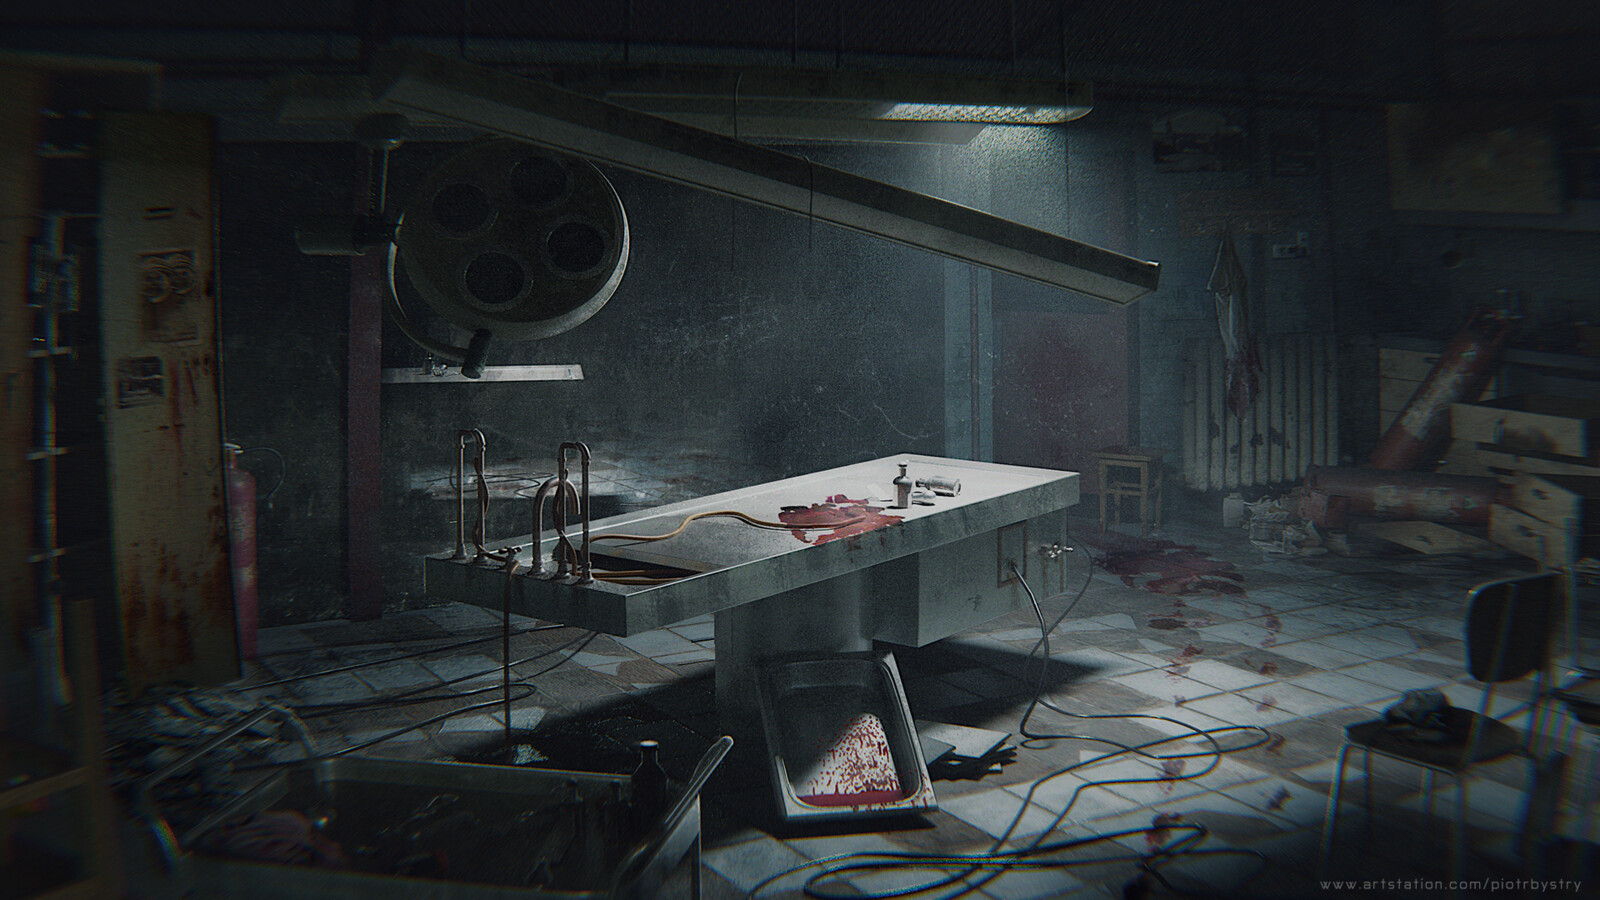 Dissecting-room concept